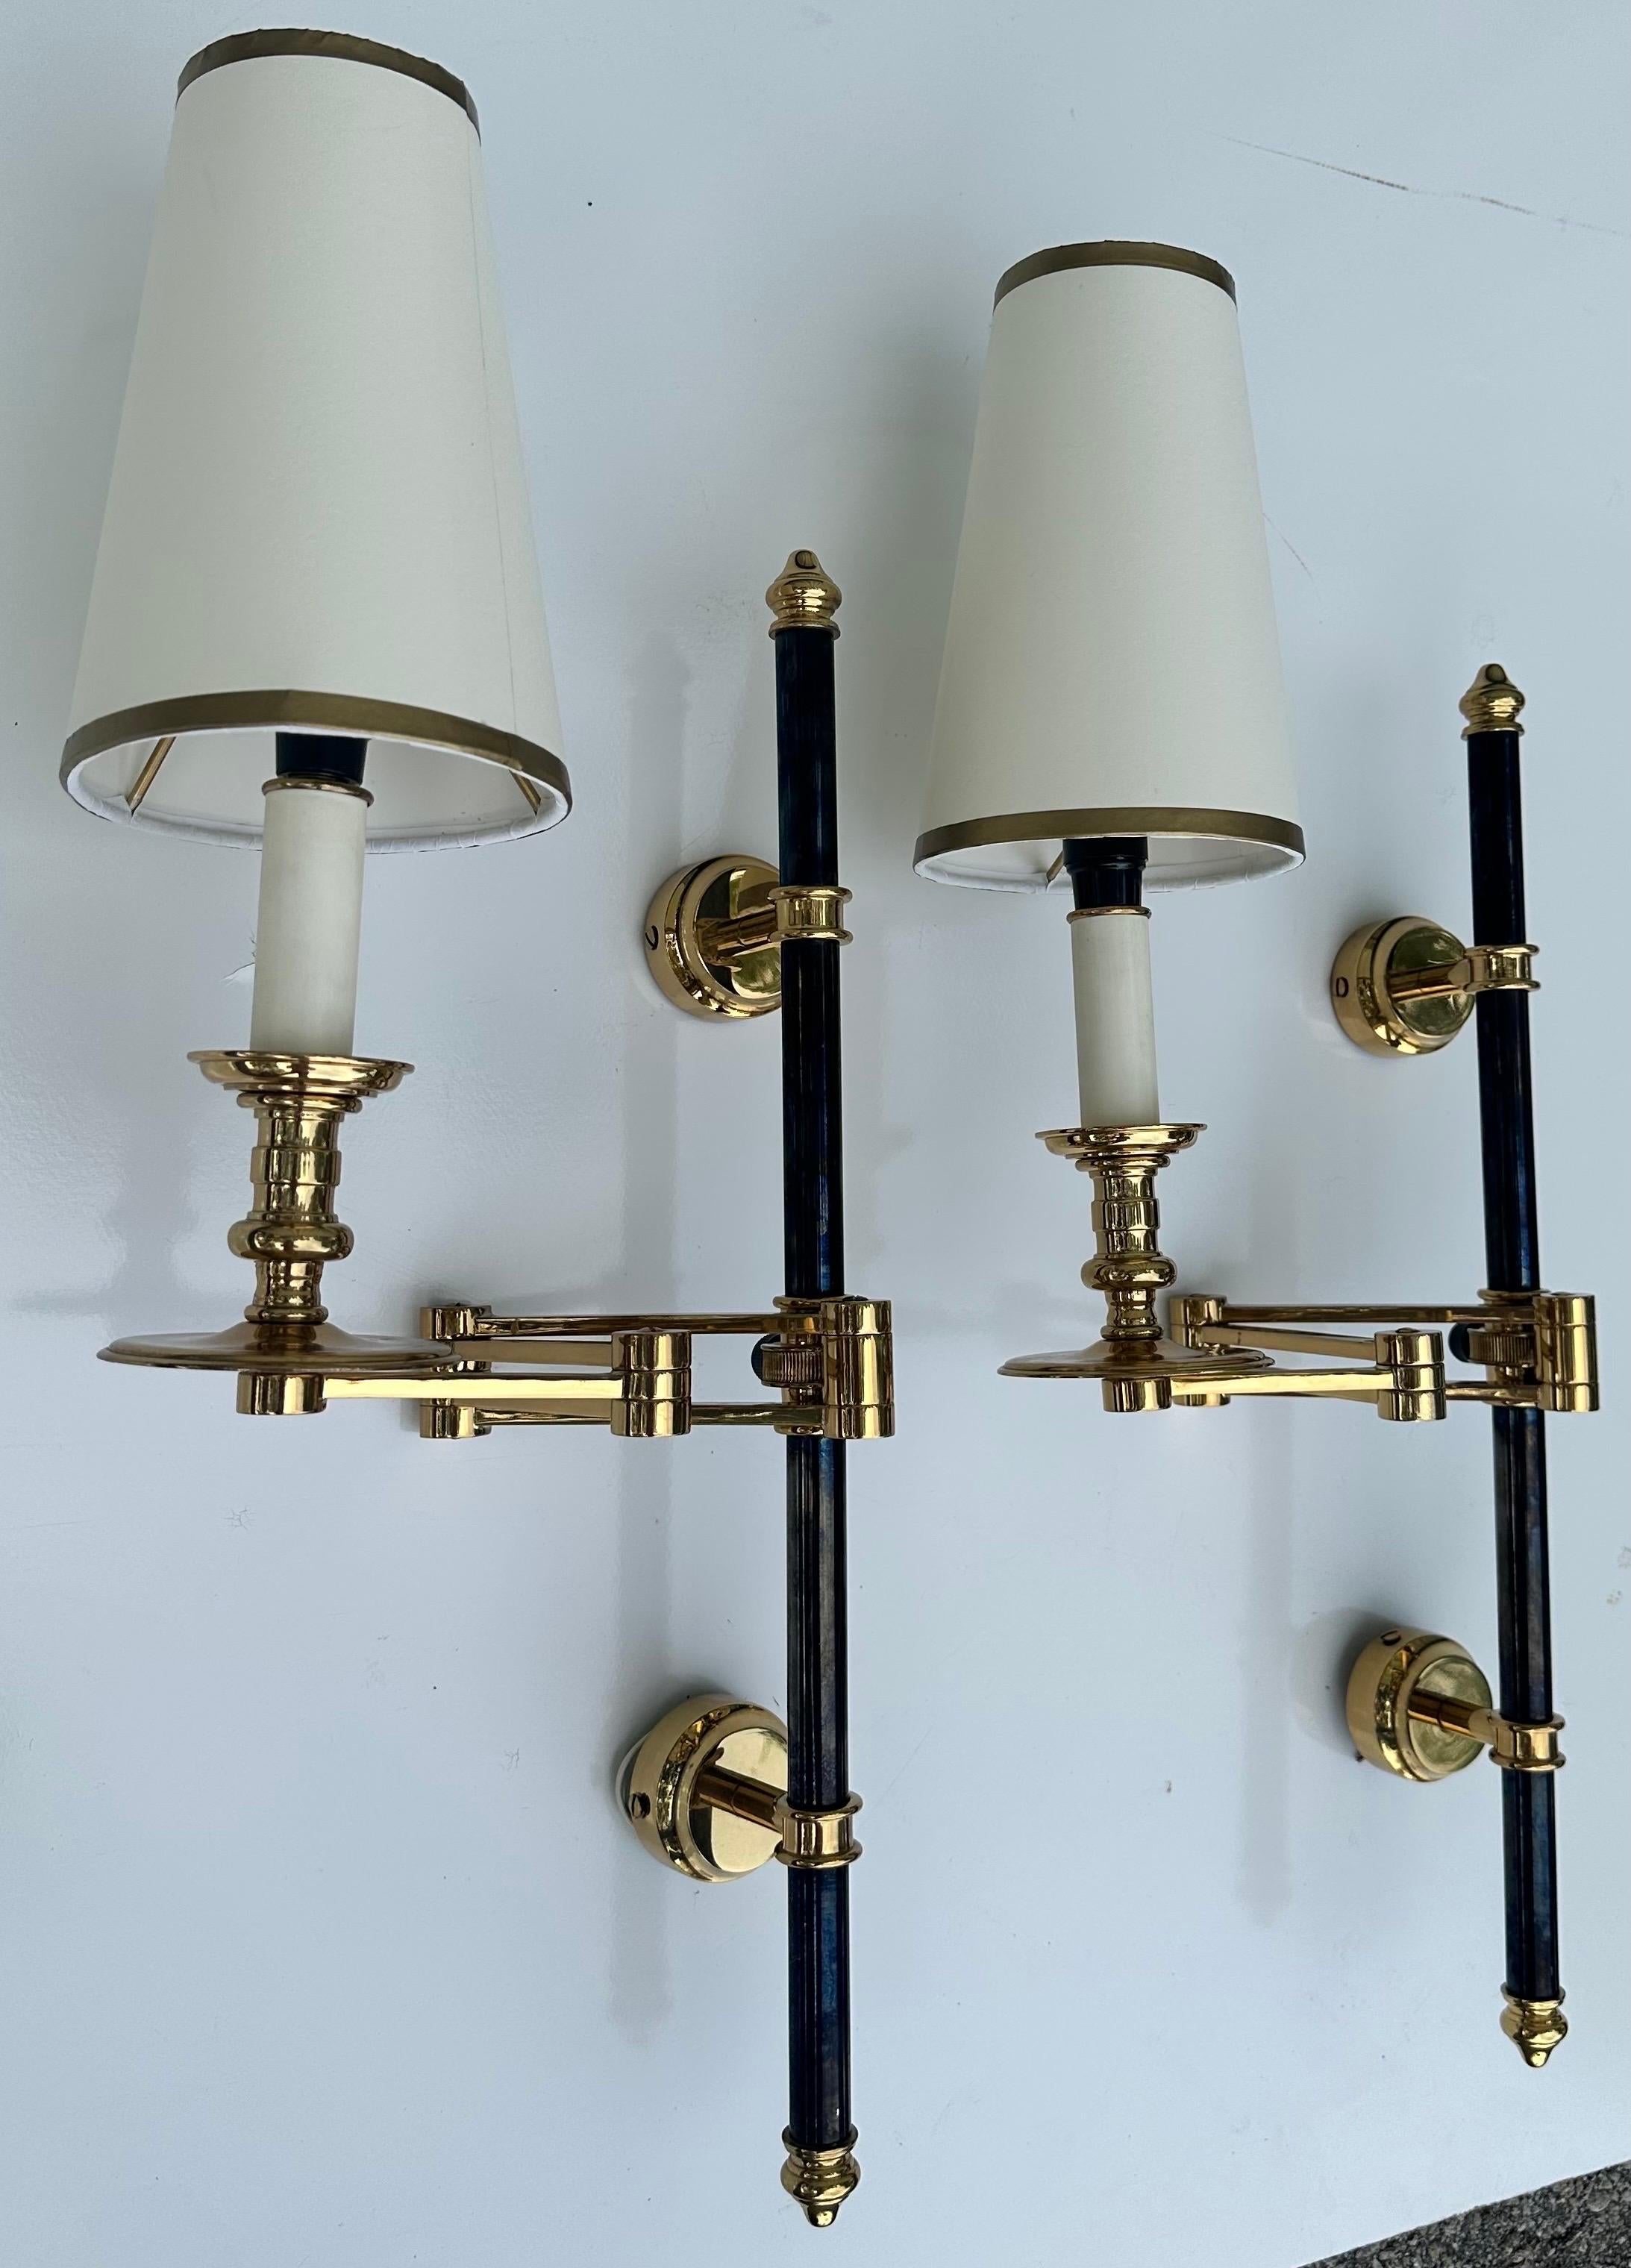 Superb pair of Maison Jansen retractable sconces,
US rewired and in working condition
Measures:
Back plate 2.3/8